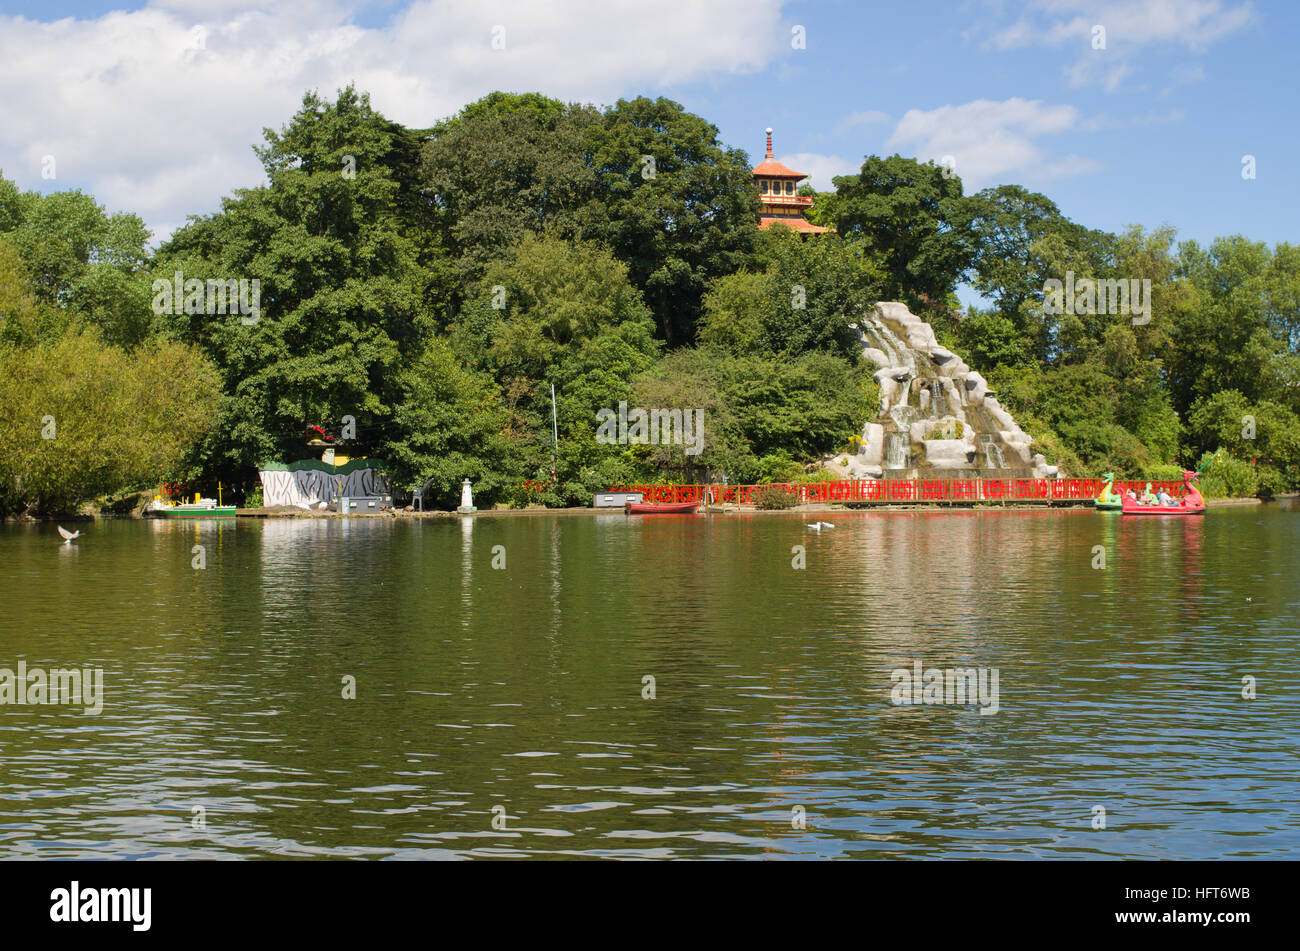 Island with artificial waterfall boating lake Peasholm Park Scarborough UK Stock Photo